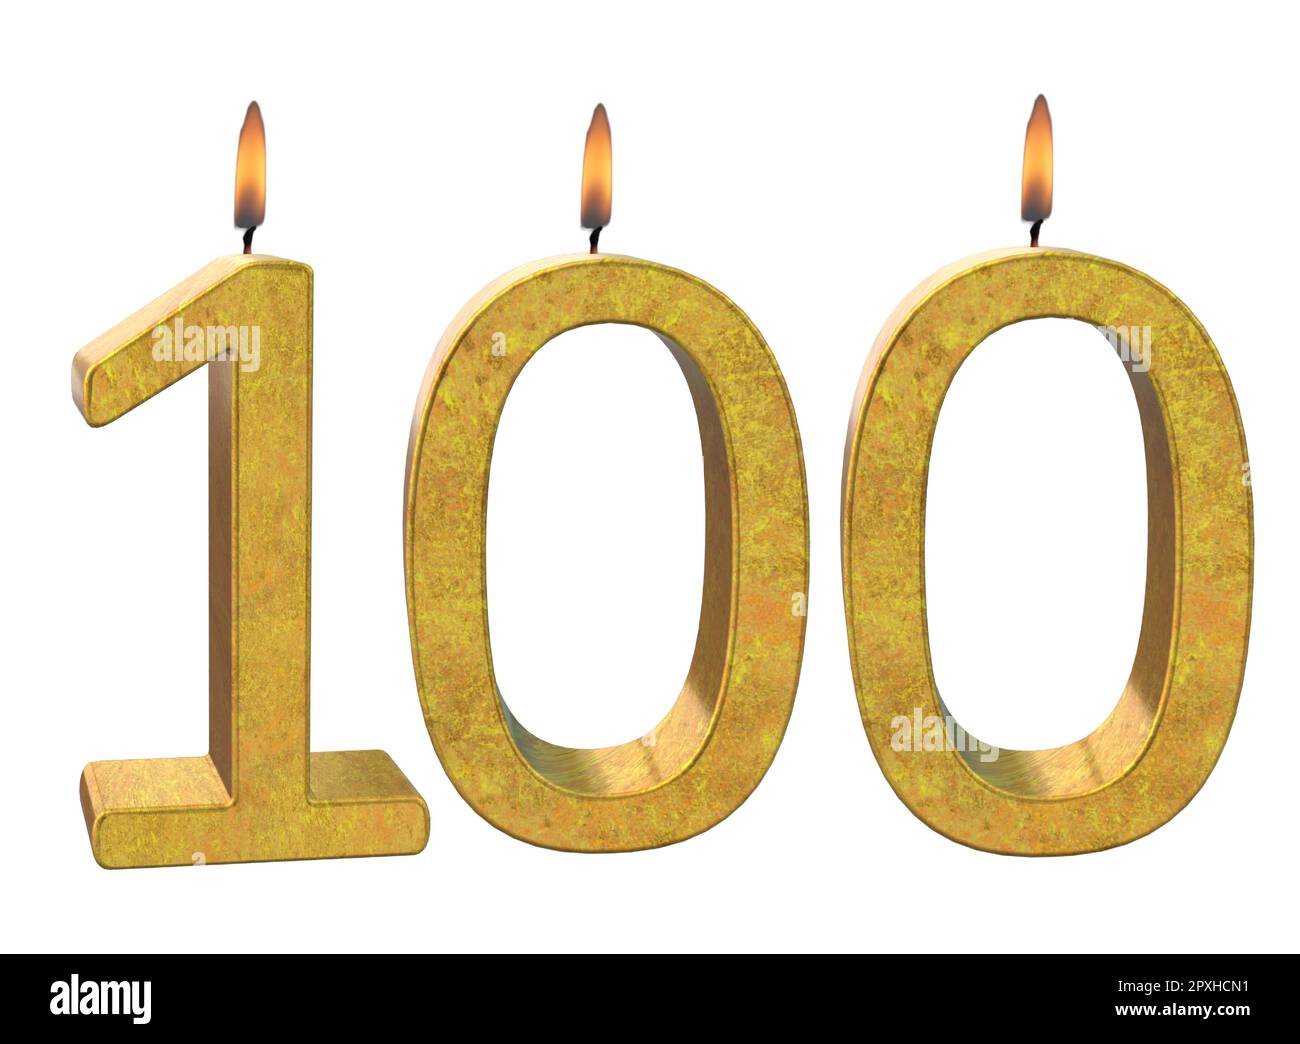 Celebrate 100th anniversary Stock Vector Images - Alamy